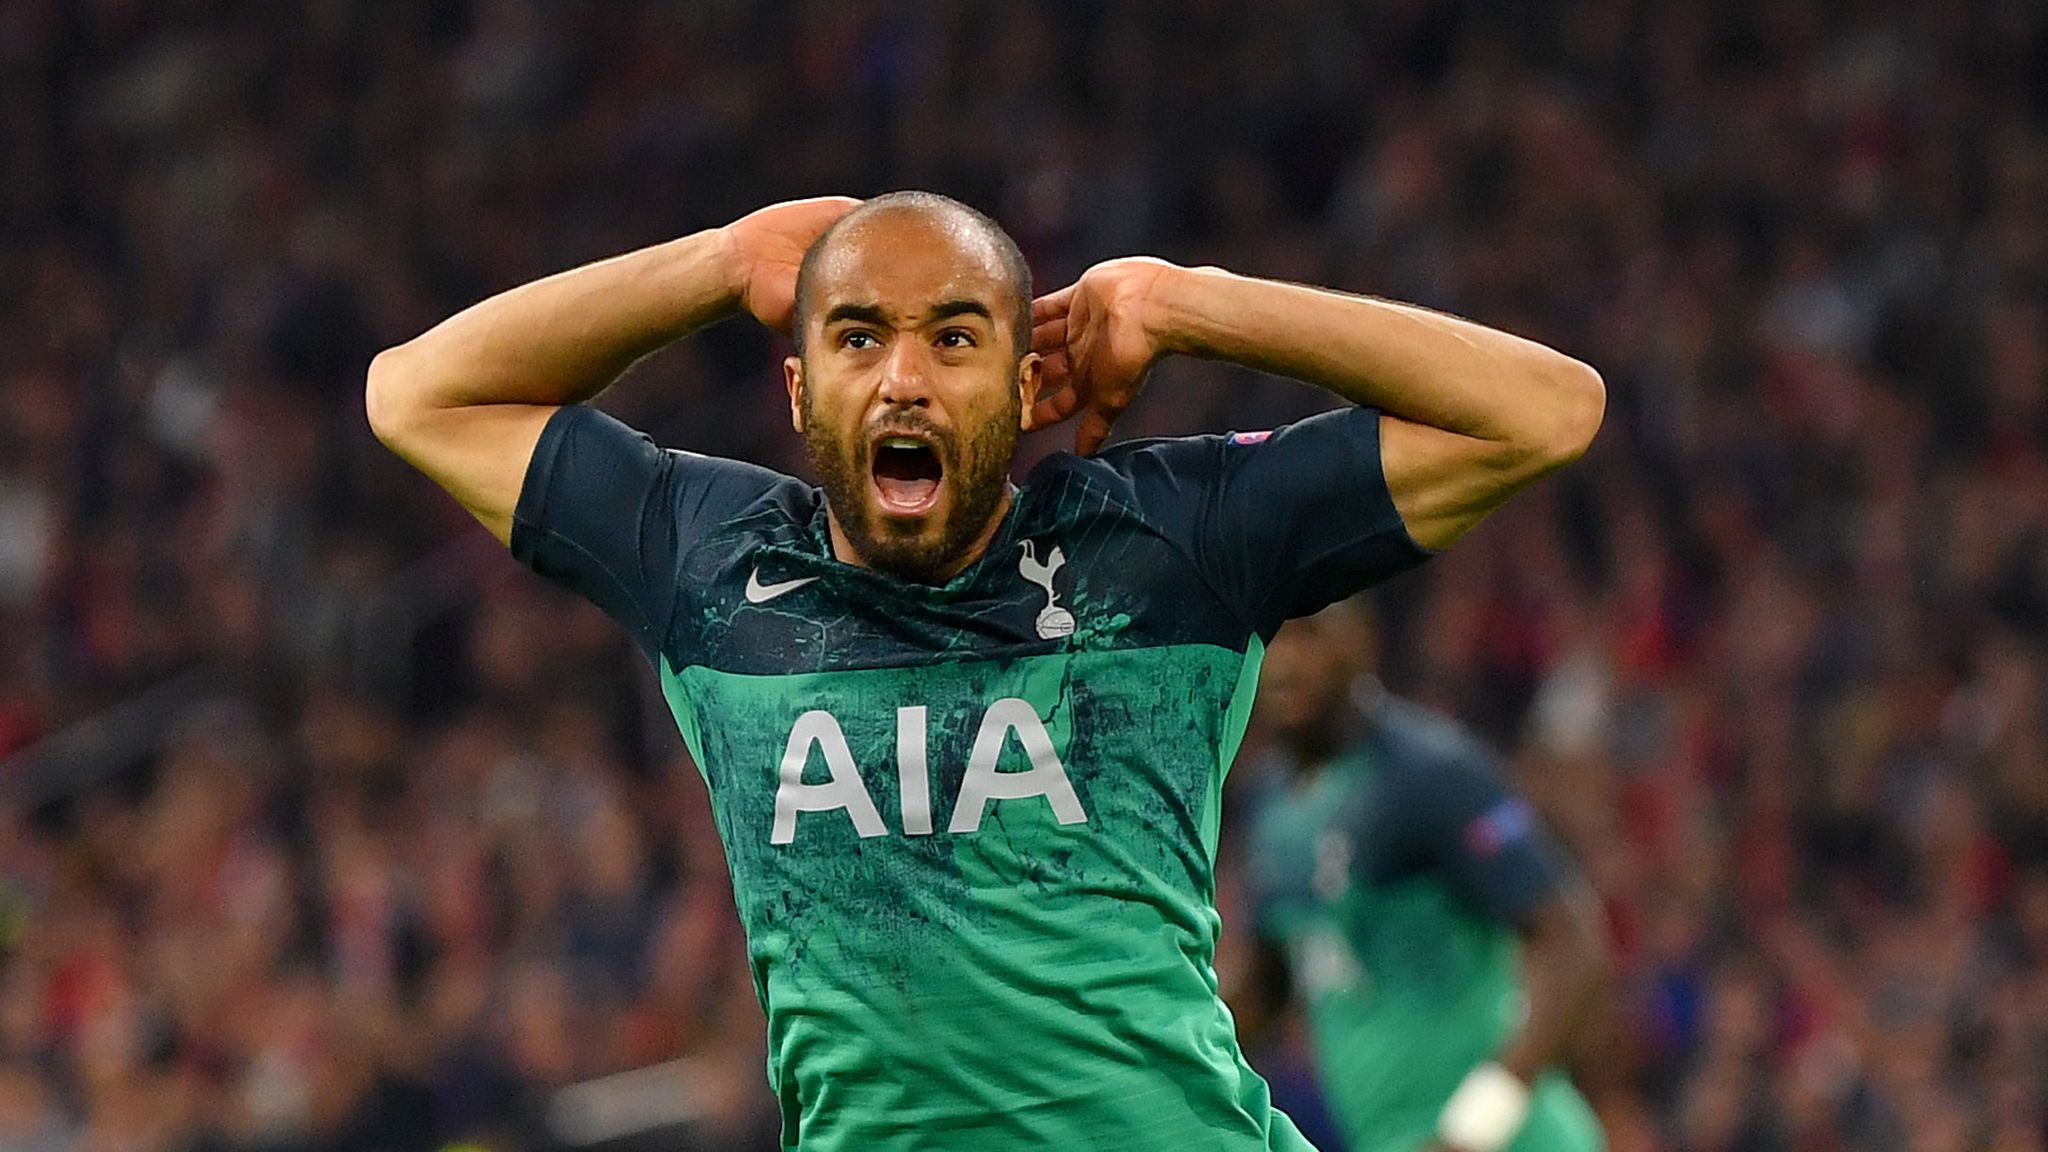 Ajax 2-3 Tottenham (Agg 3-3) Lucas Moura hat-trick secures incredible Spurs win Football News Sky Sports